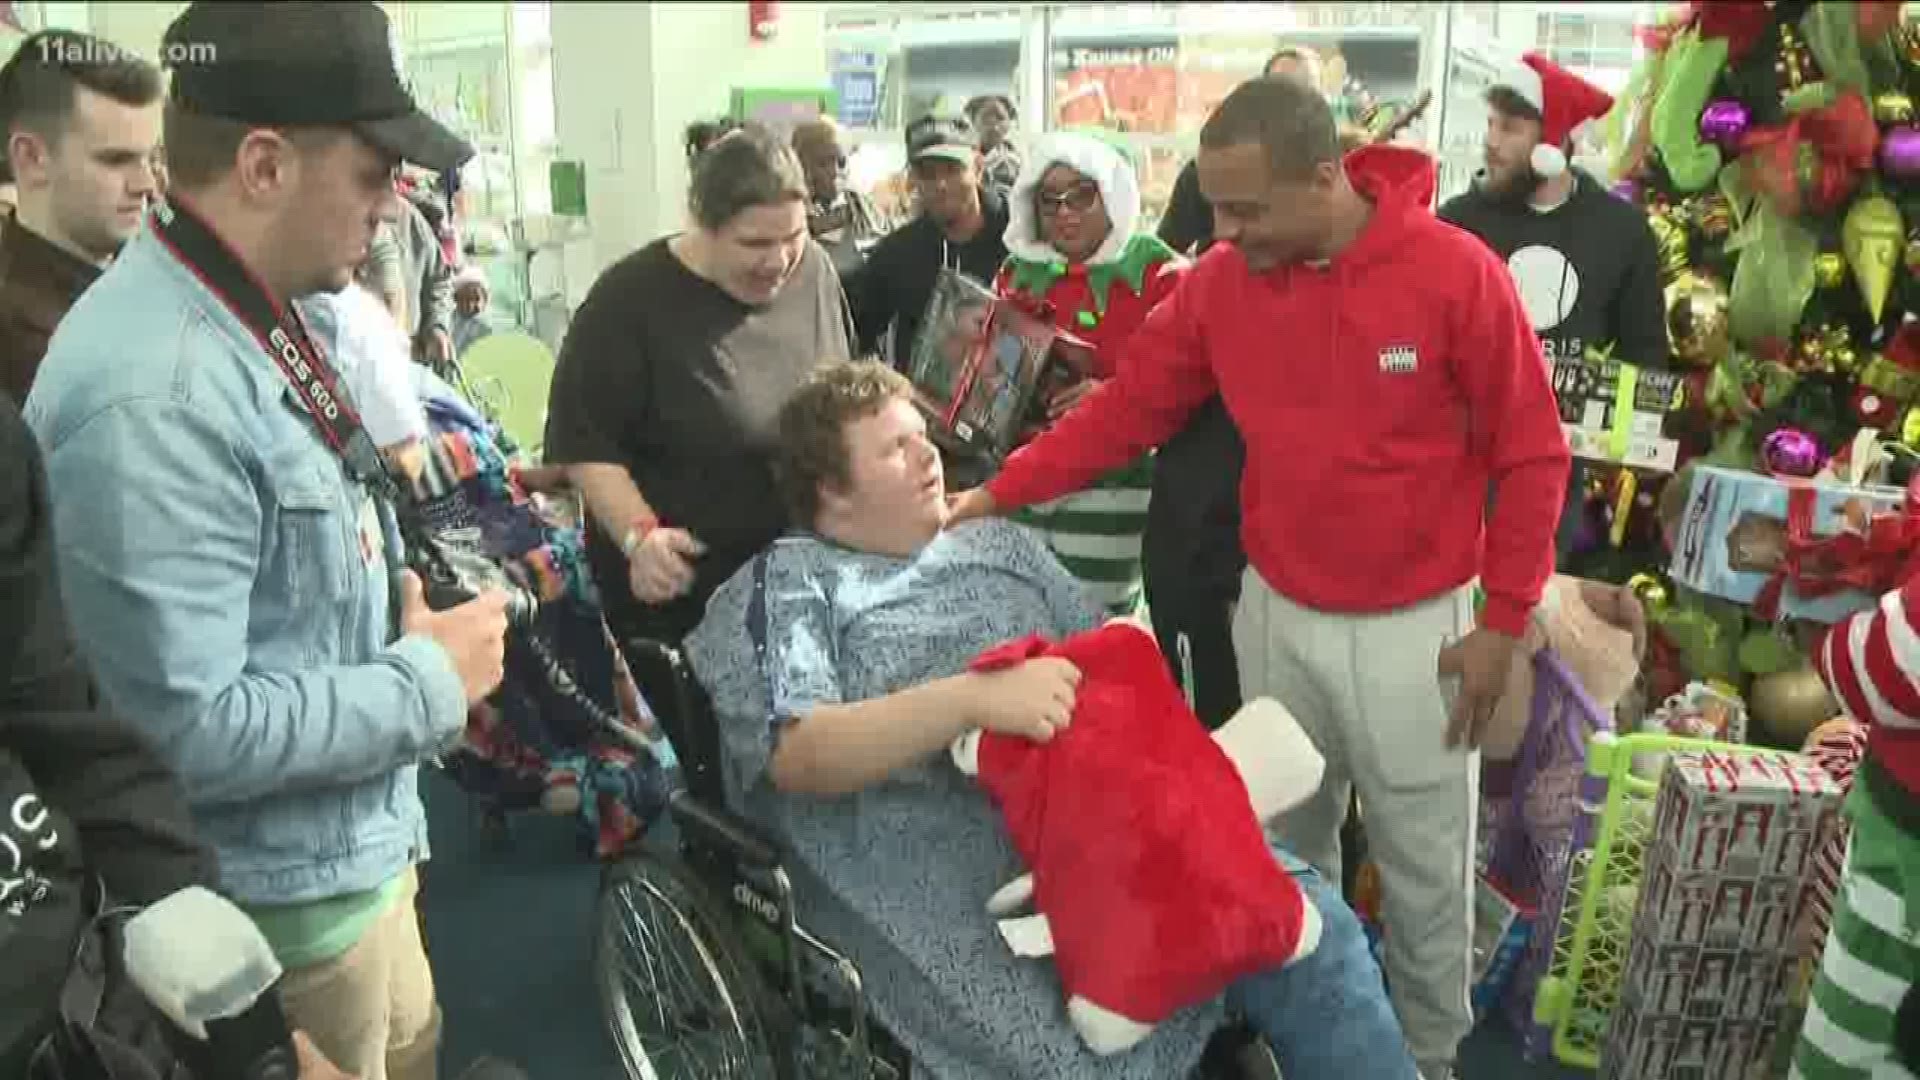 Atlanta rapper T.I. visited Children's Healthcare of Atlanta at Egelston to hand out gifts to patients.